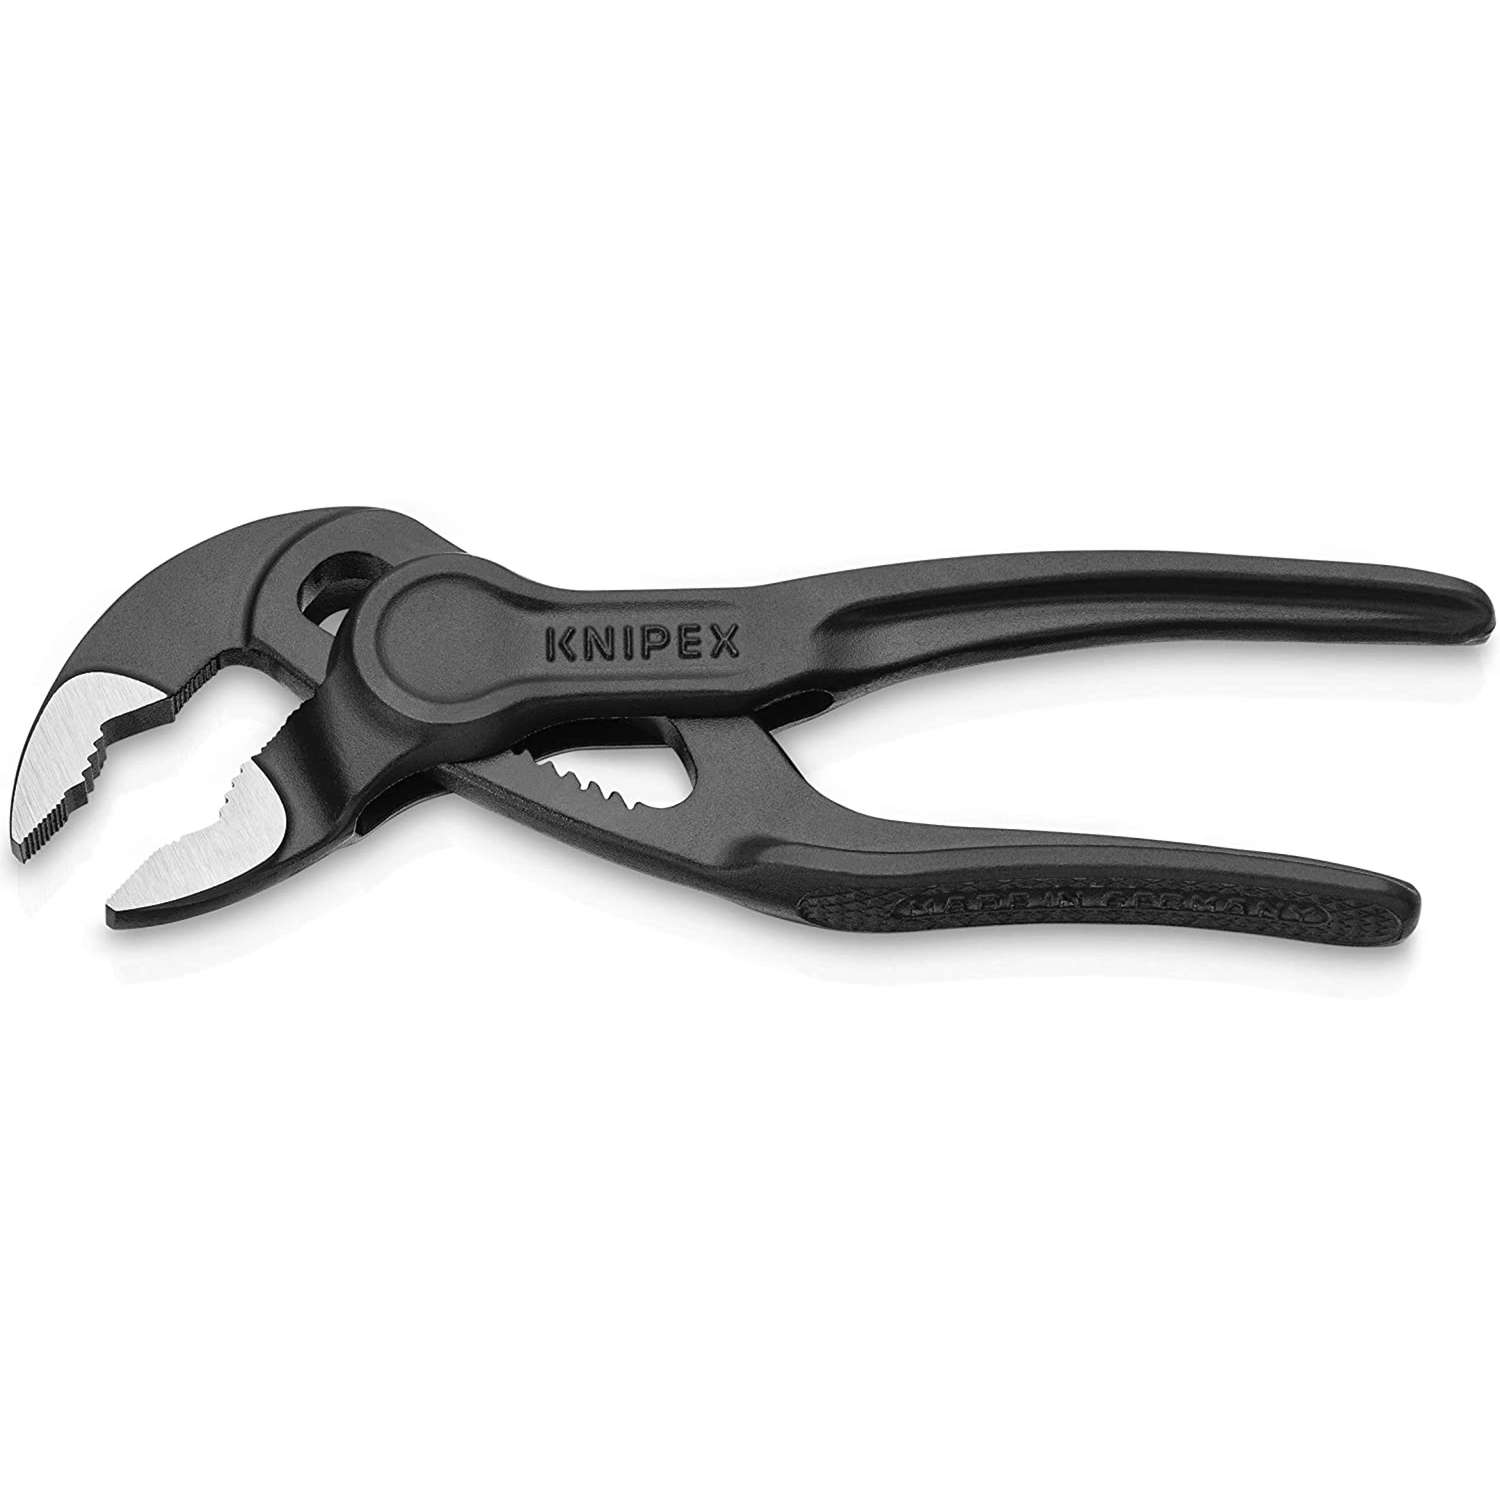 Knipex 4-in-1 Electricians' Pliers 10-14 AWG 